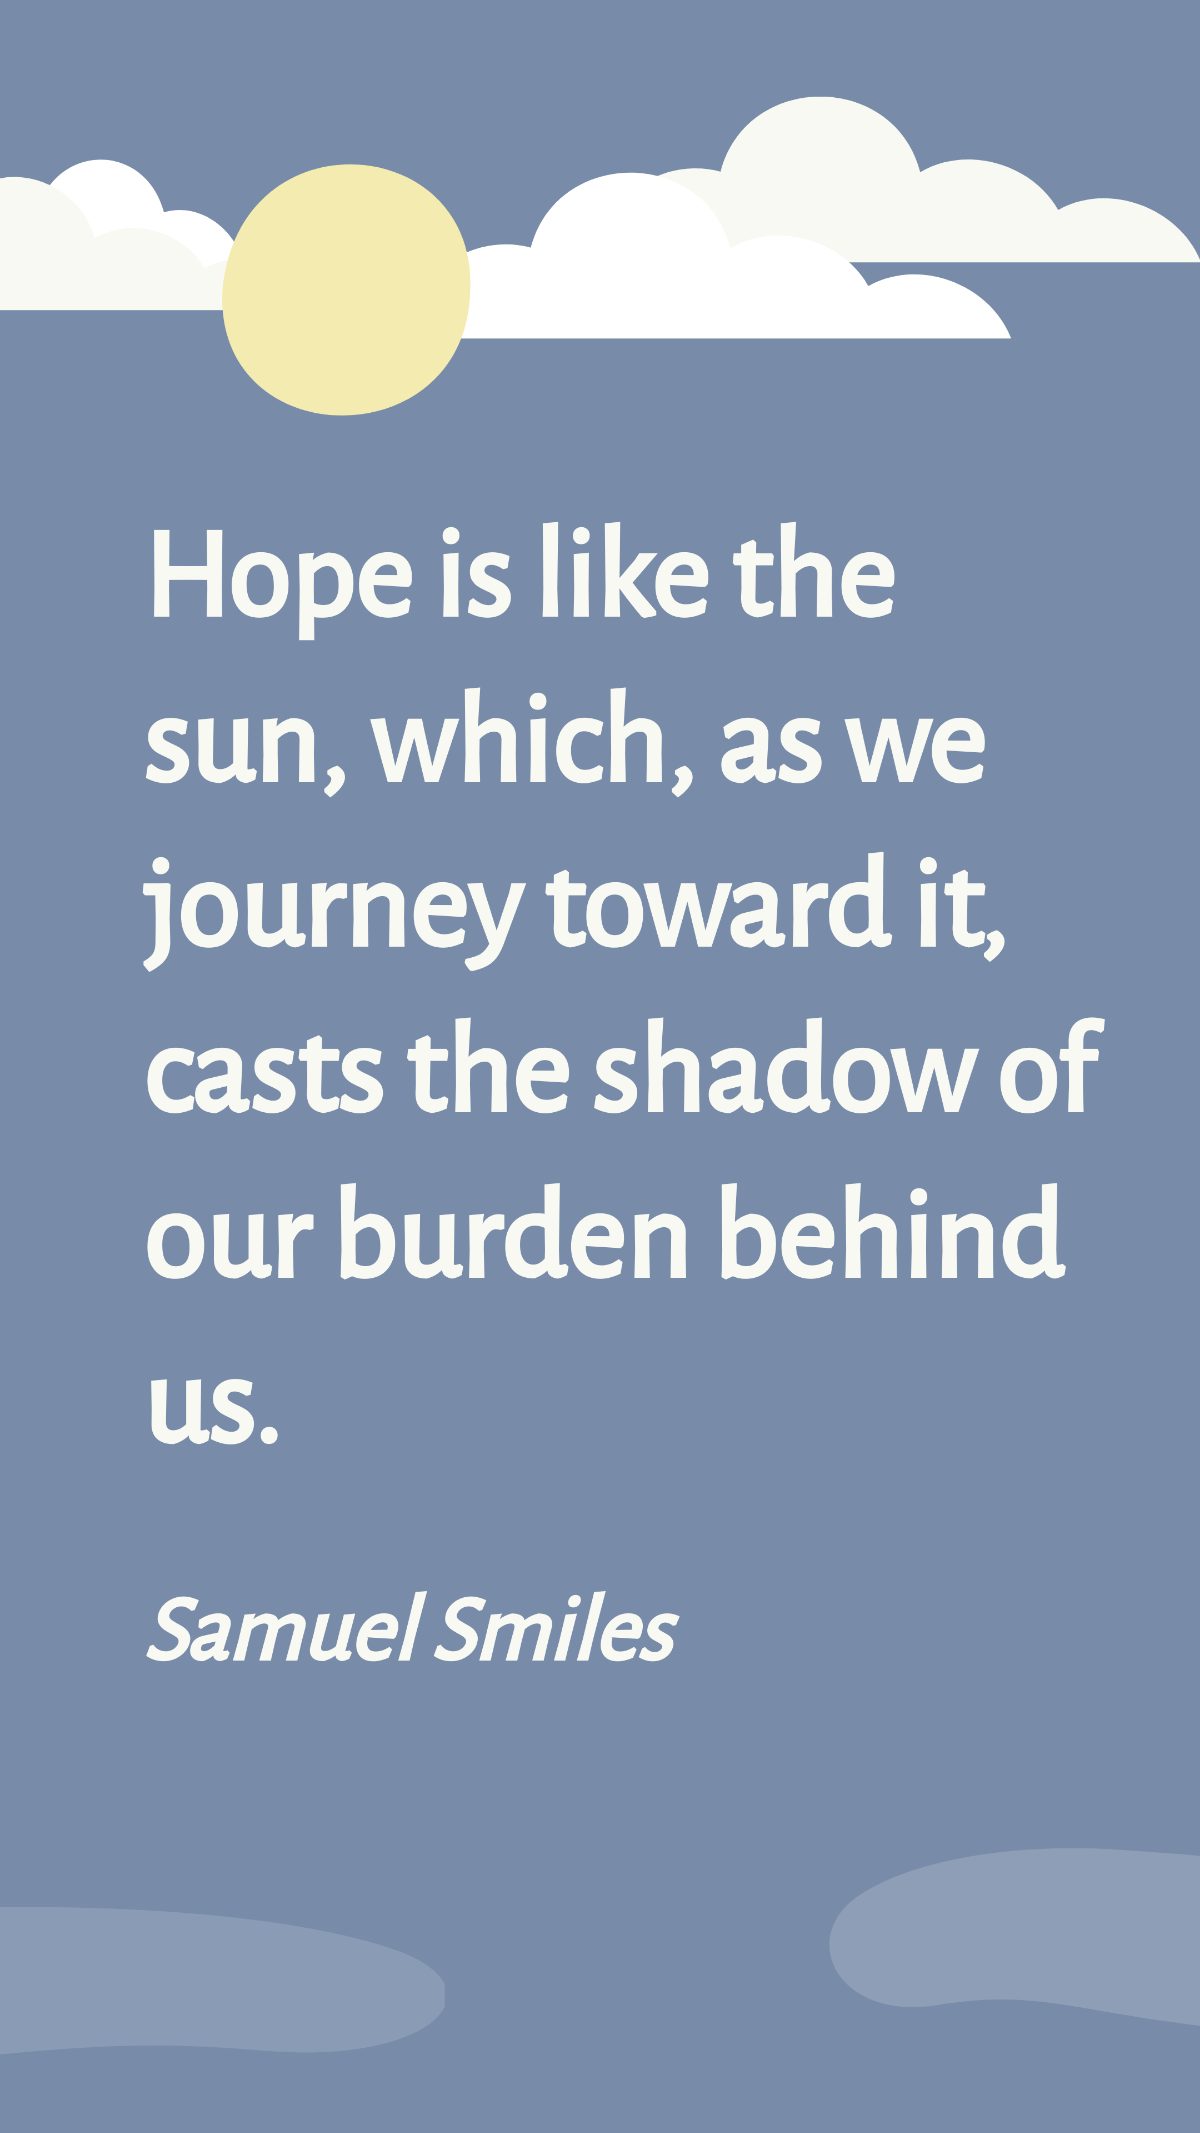 Free Samuel Smiles -Hope is like the sun, which, as we journey toward it, casts the shadow of our burden behind us. Template